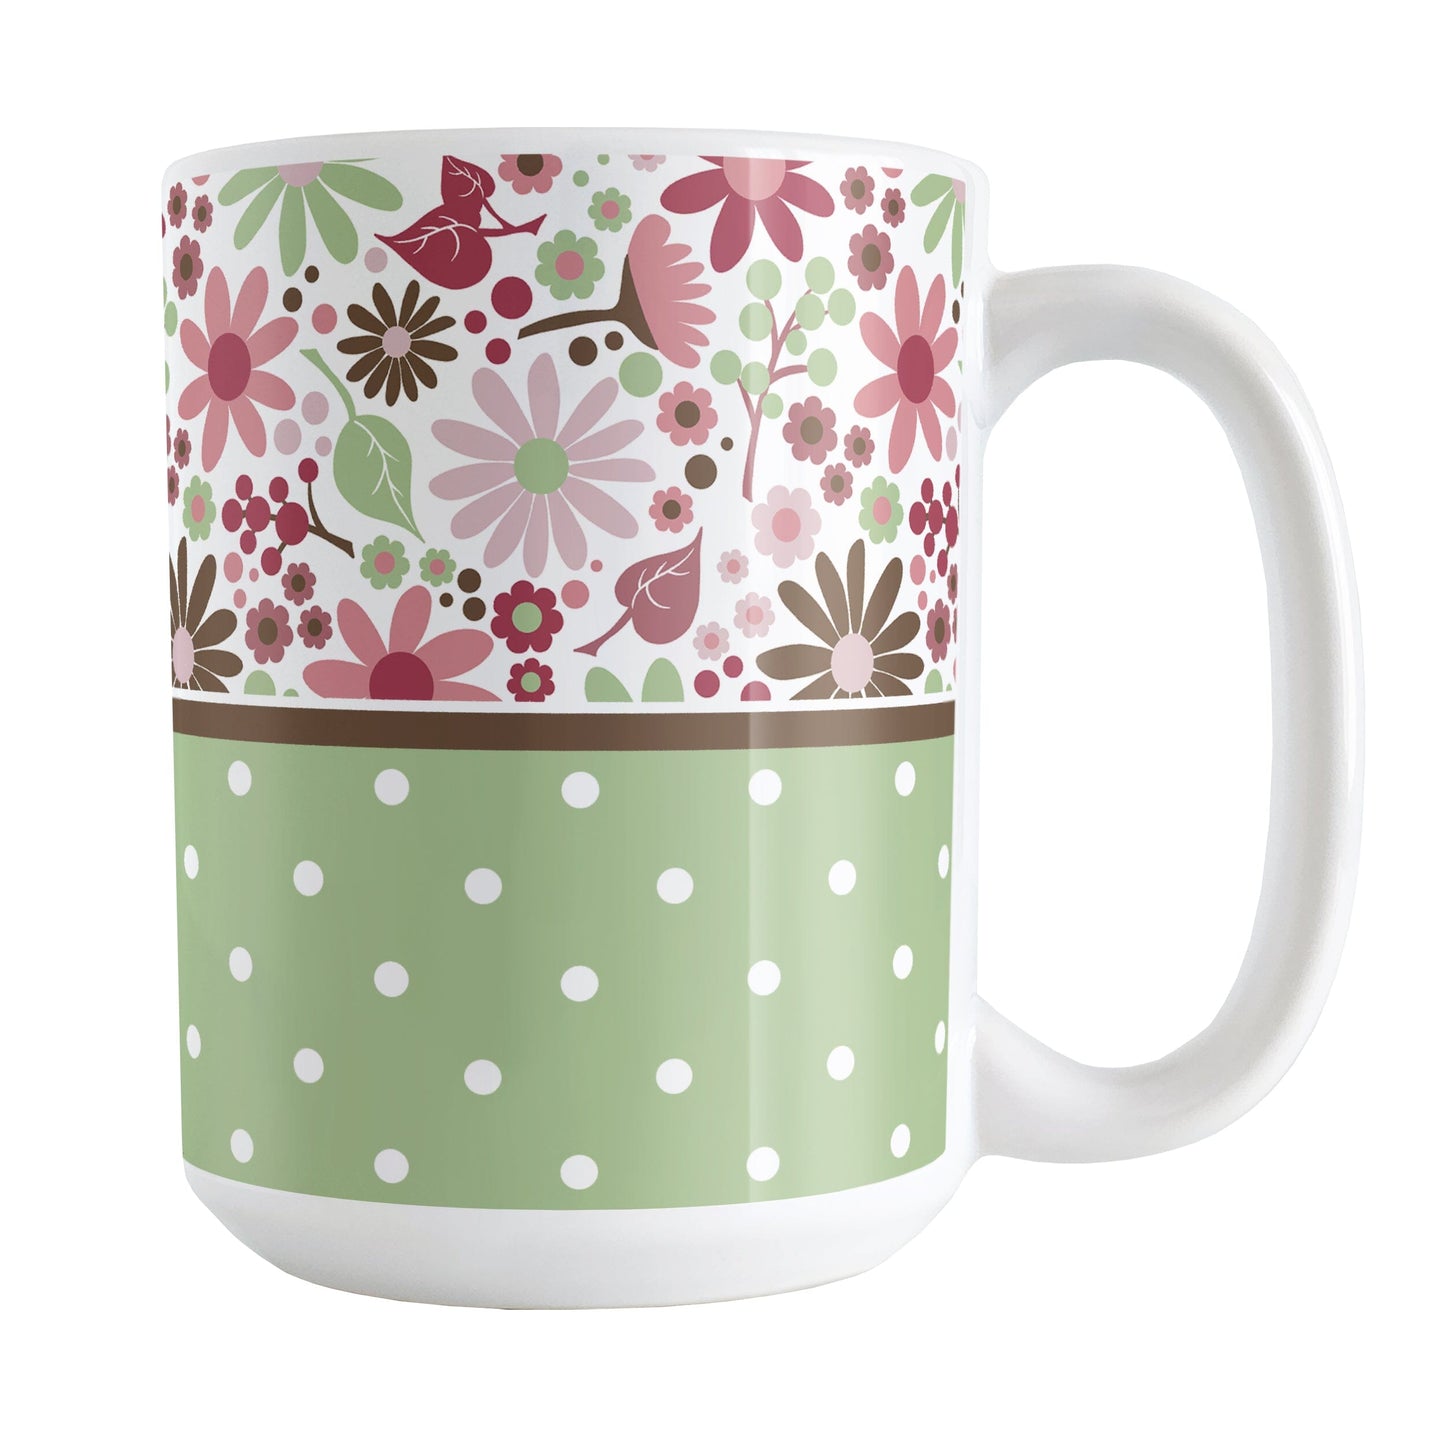 Berry Green Summer Flowers Polka Dot Mug (15oz) at Amy's Coffee Mugs. A ceramic coffee mug designed with a pretty floral pattern in a gorgeous berry pink color palette, with sage green and brown along the top, and a green polka dot pattern along the bottom. These patterns wrap around the mug to the handle.